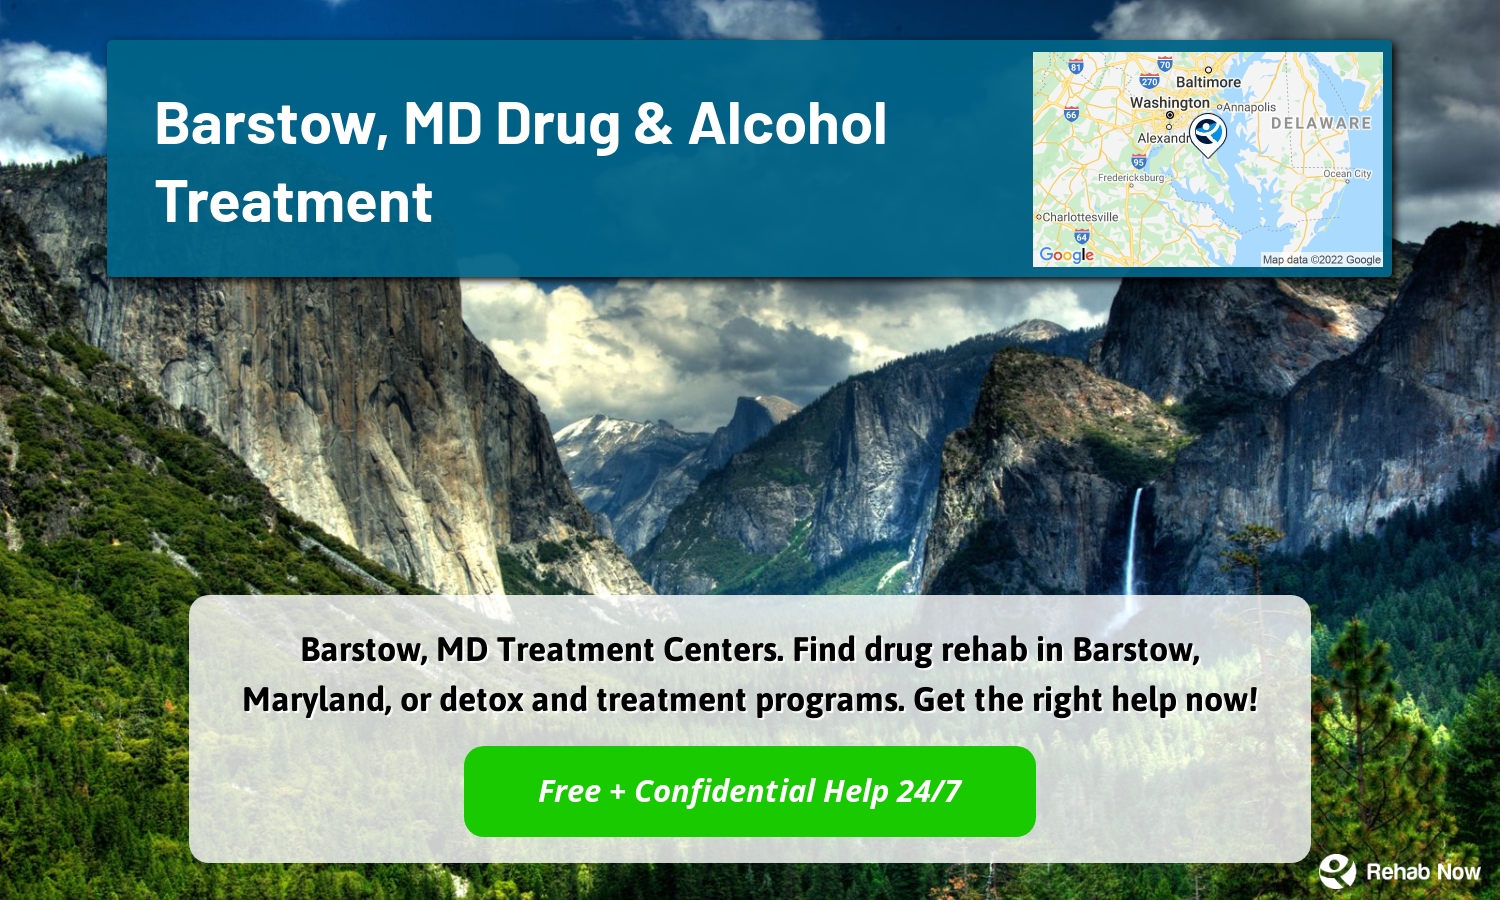 Barstow, MD Treatment Centers. Find drug rehab in Barstow, Maryland, or detox and treatment programs. Get the right help now!